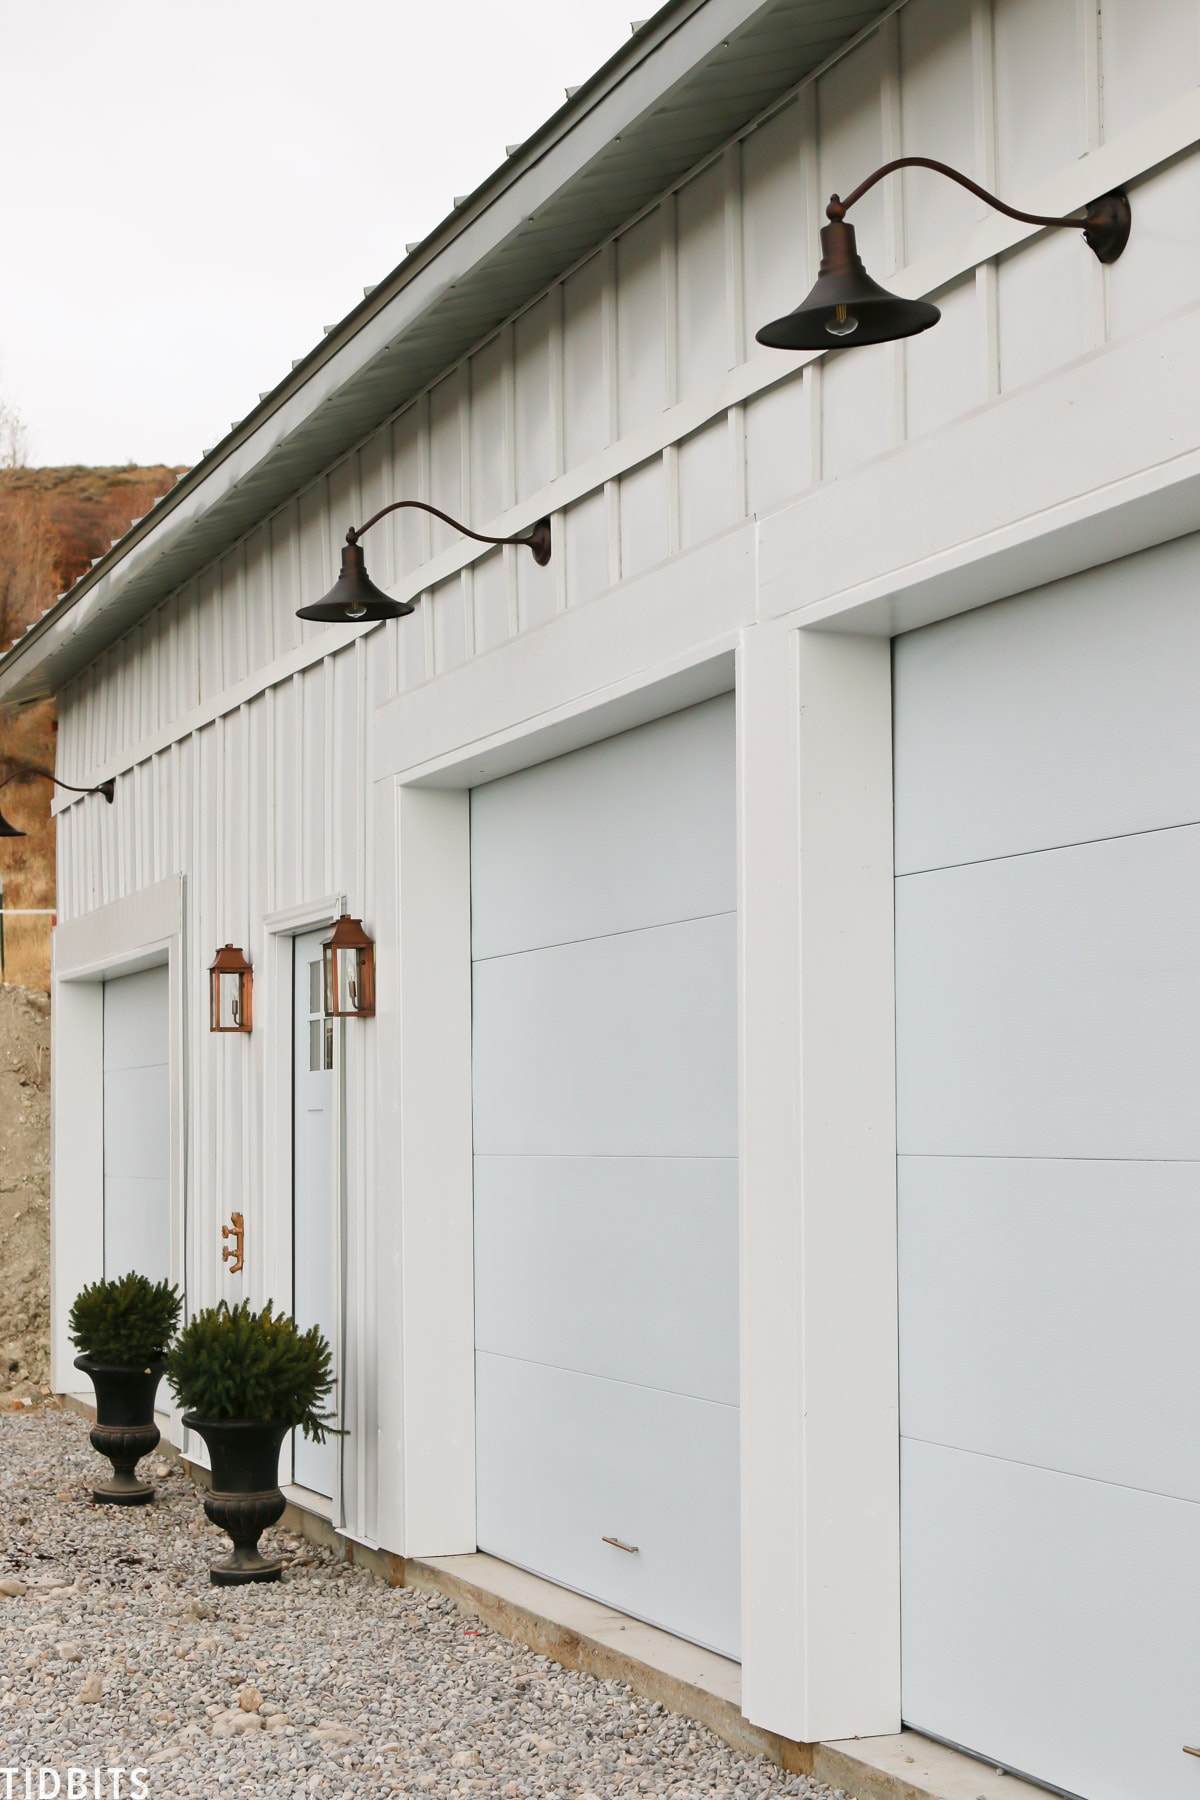 Painted garage doors, steel siding and roofing, pole barn home. 